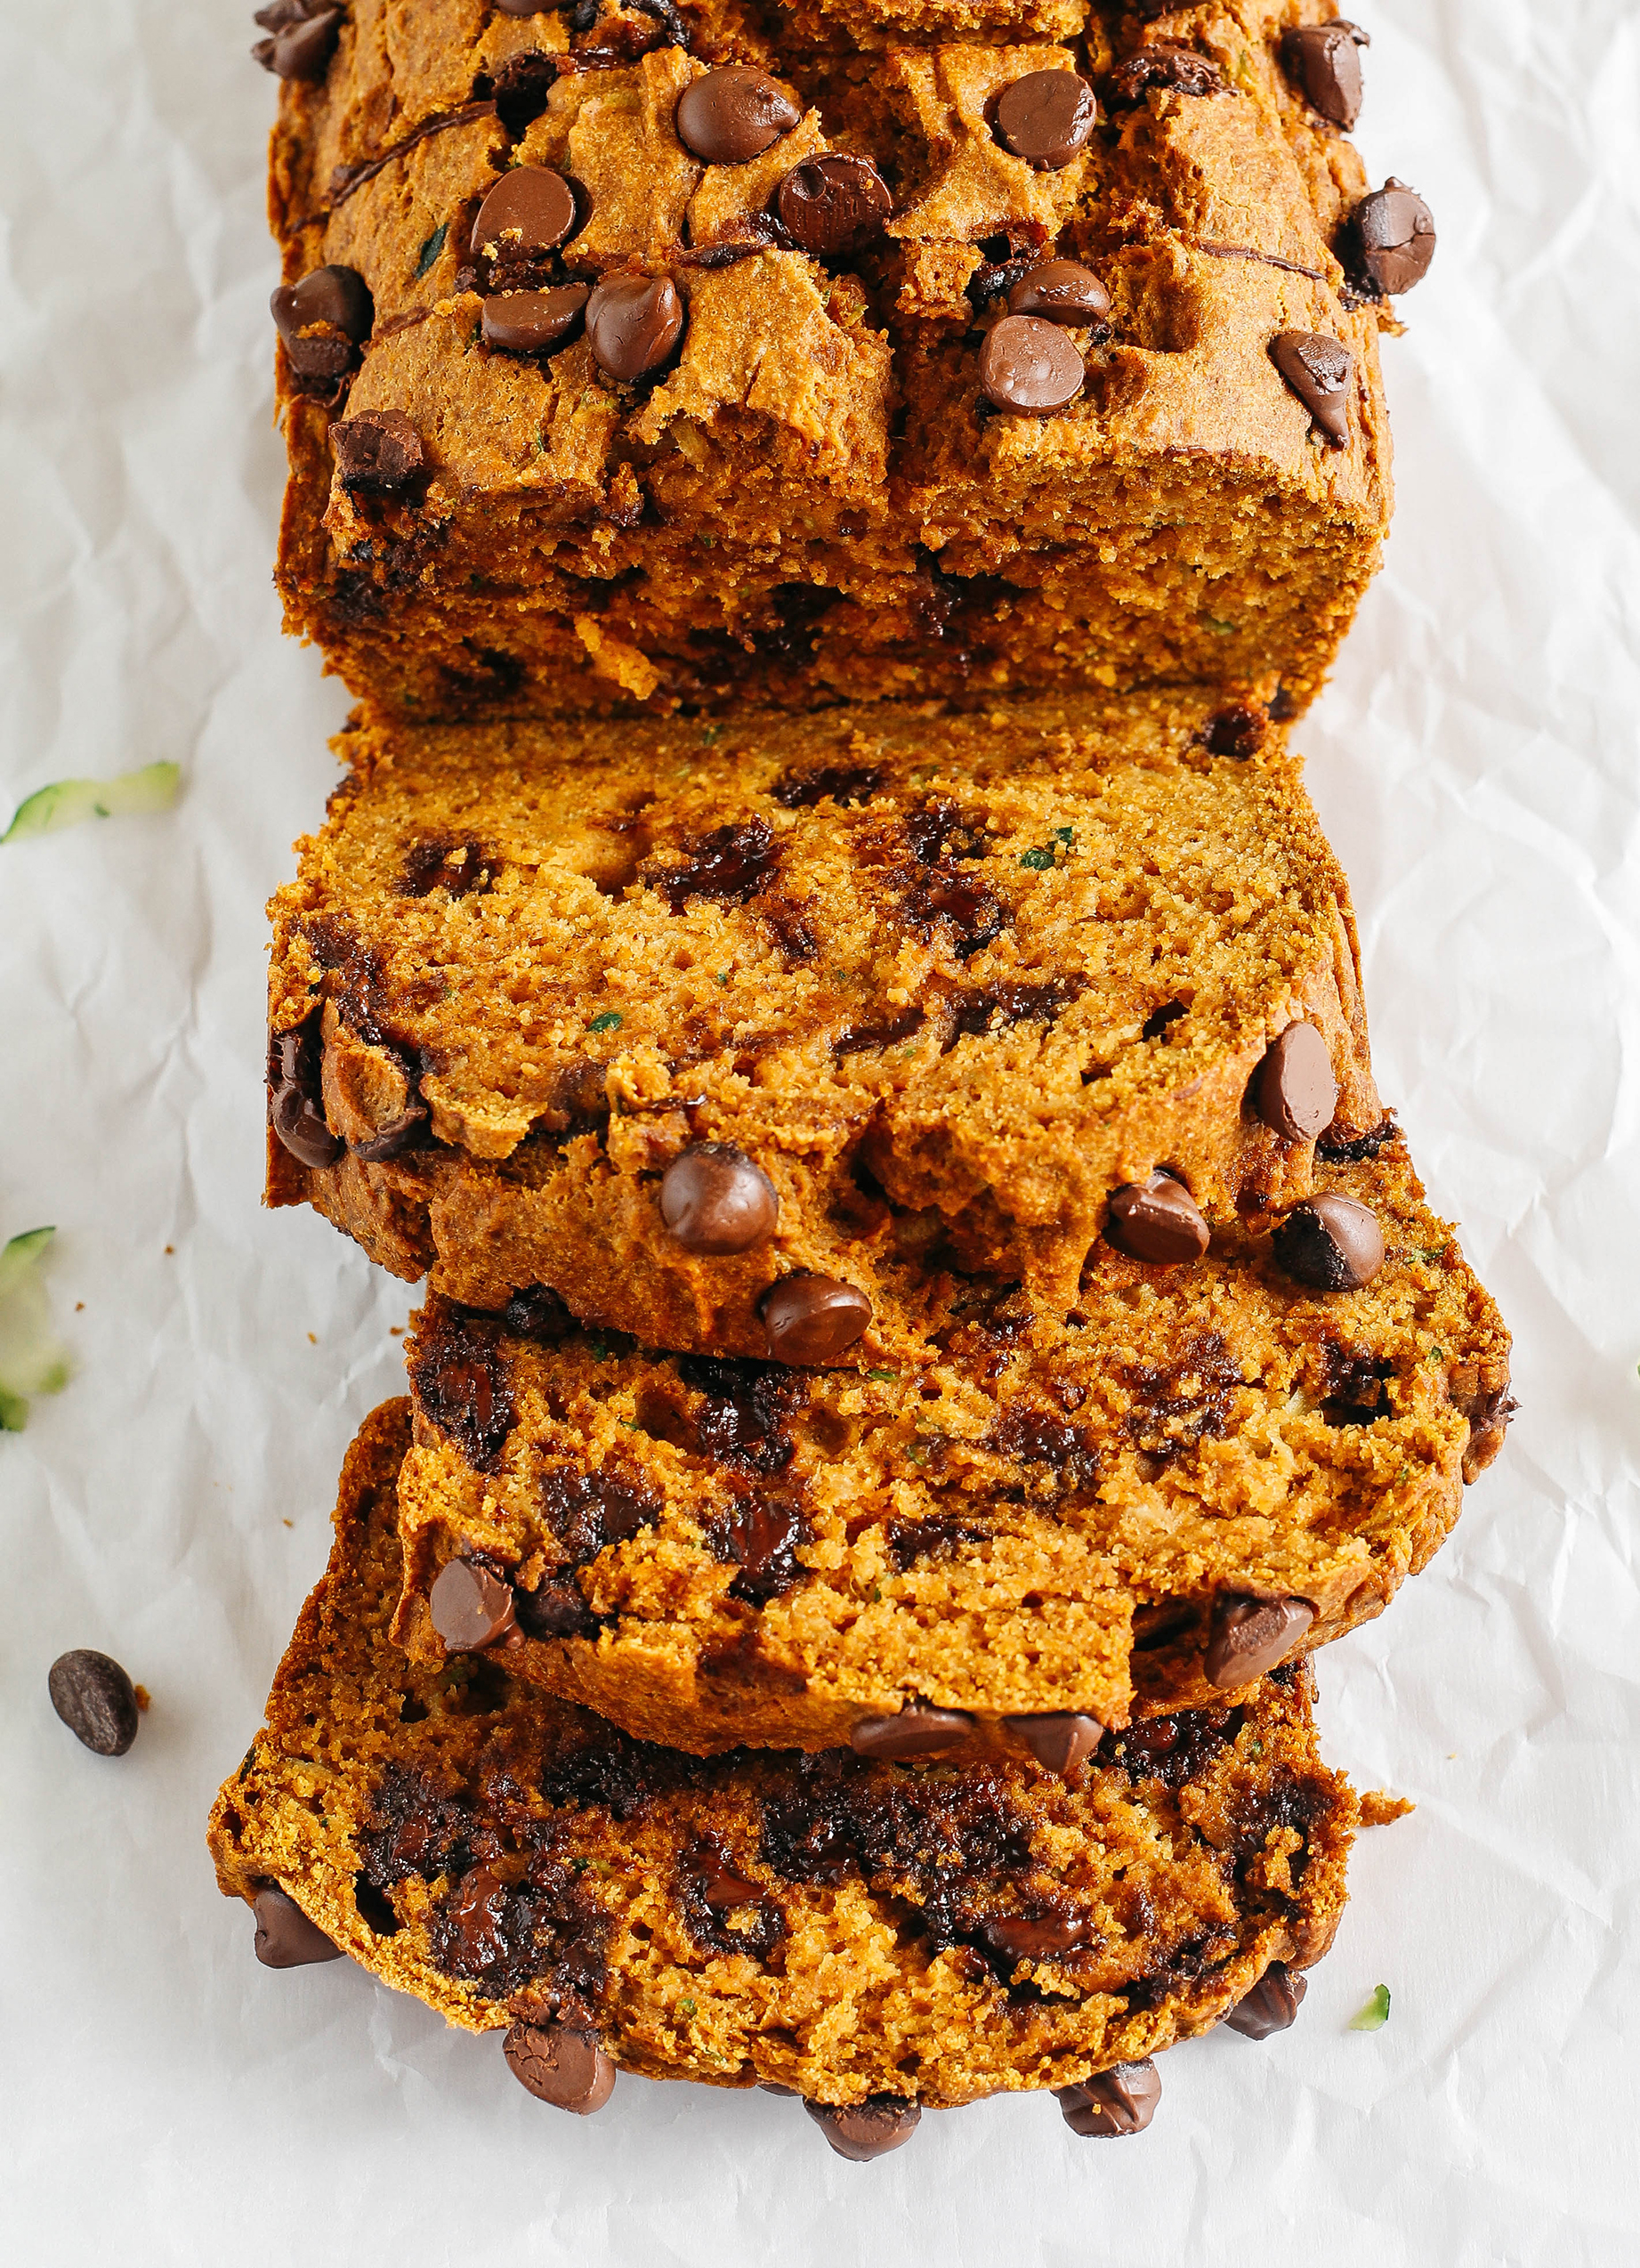 Healthy Pumpkin Zucchini Bread that is moist, fluffy and made healthier with whole wheat flour, Greek yogurt, shredded zucchini and zero butter or refined sugar.  Loaded with warm flavors and studded with chunks of chocolate in every bite!